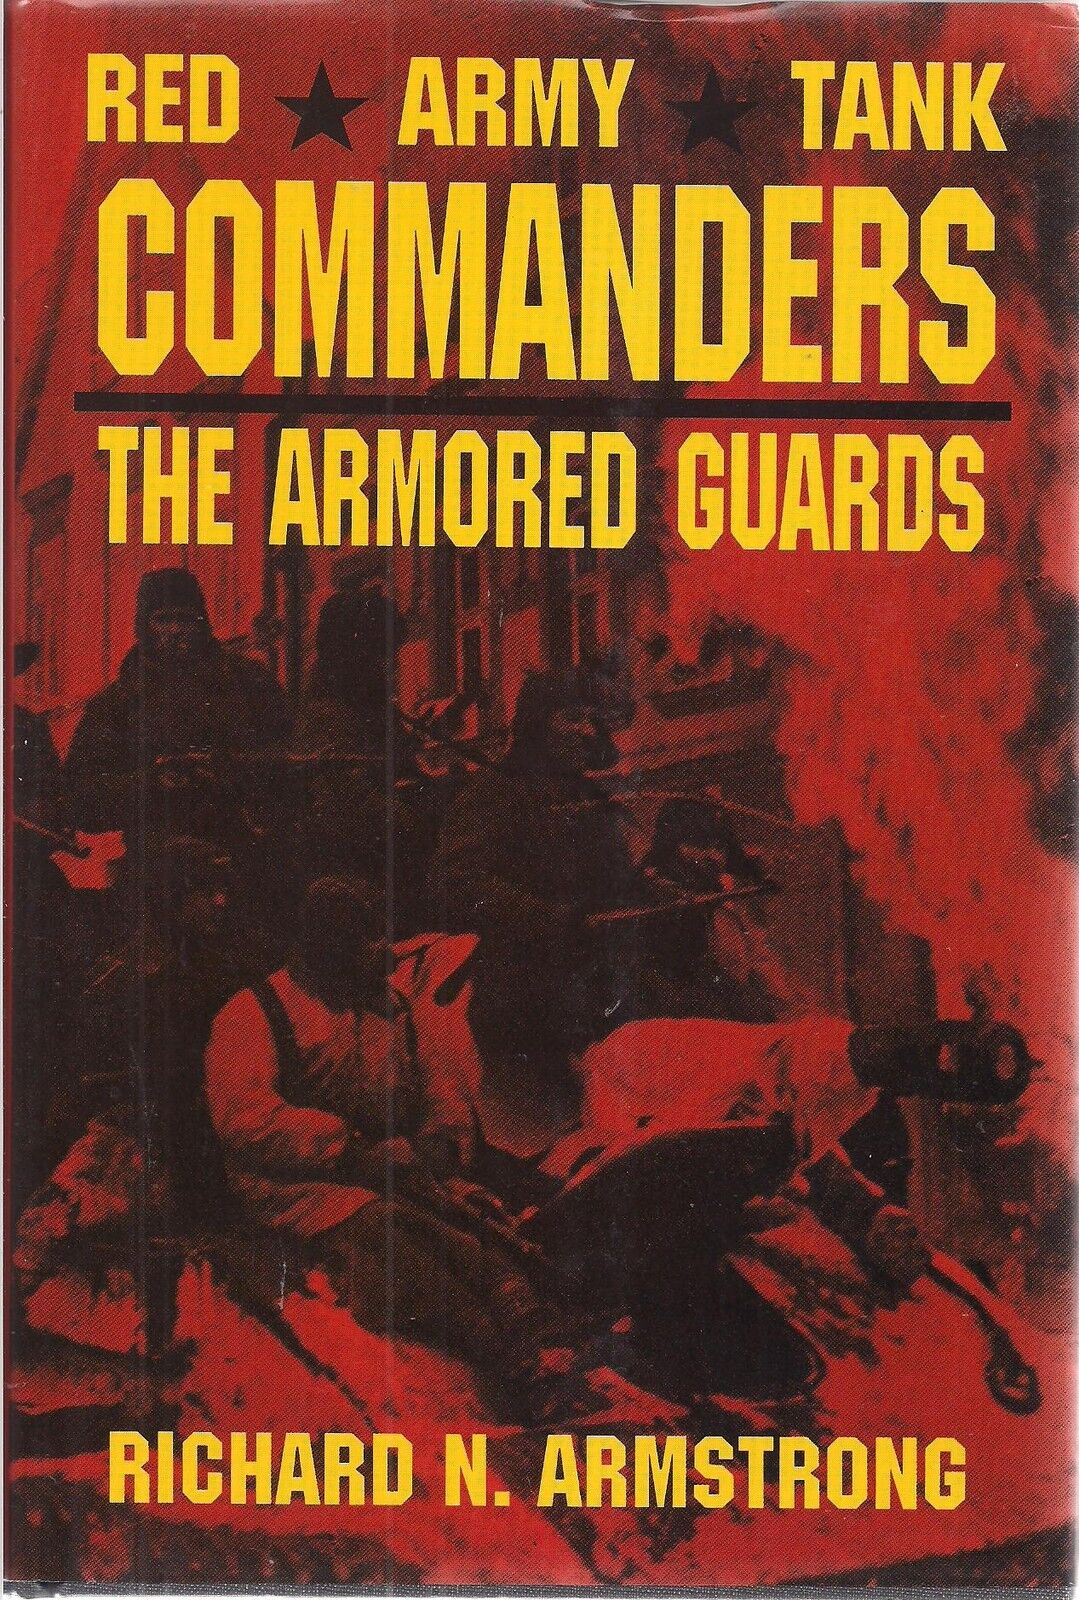 Red Army Tank Commanders, The Armored Guards by Richard N. Armstrong